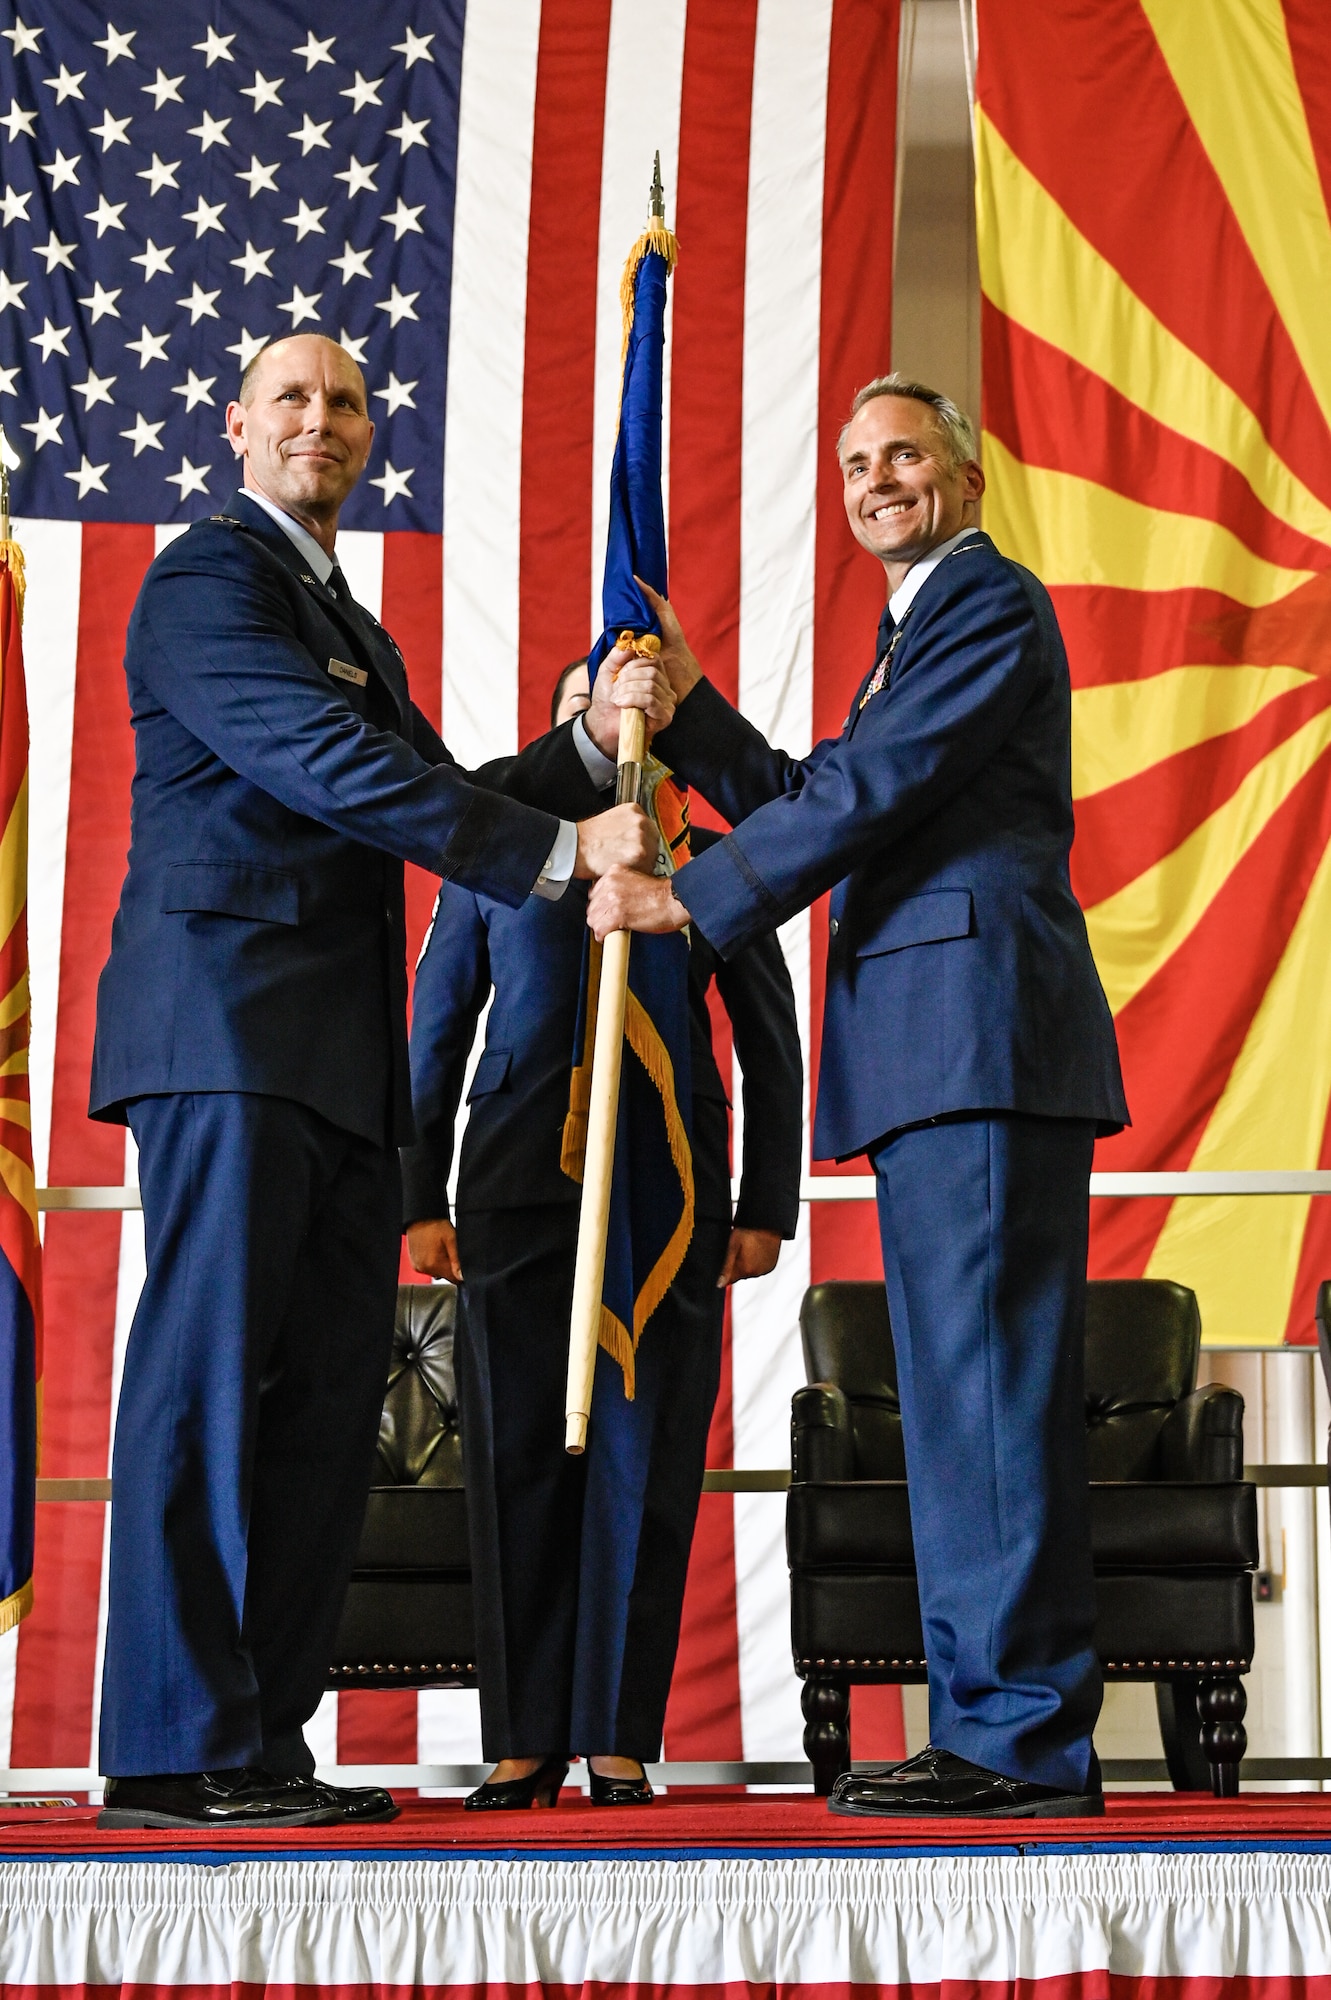 U.S. Air Force Col. Brant Putnam takes command of the 162nd Wing while taking the unit guidon passed from Maj. Gen. Troy Daniels the Assistant Adjutant General for the Air, and Air Component Commander, for the Arizona Air National Guard, and serves as the Air National Guard Assistant to the Secretary of the Air Force, International Affairs during a ceremony at Morris Air National Guard Base, Sept. 10. Putnam replaces Butler who retired after more than 35 years of service. (U.S. Air Force photo by Staff Sgt. Van Whatcott)